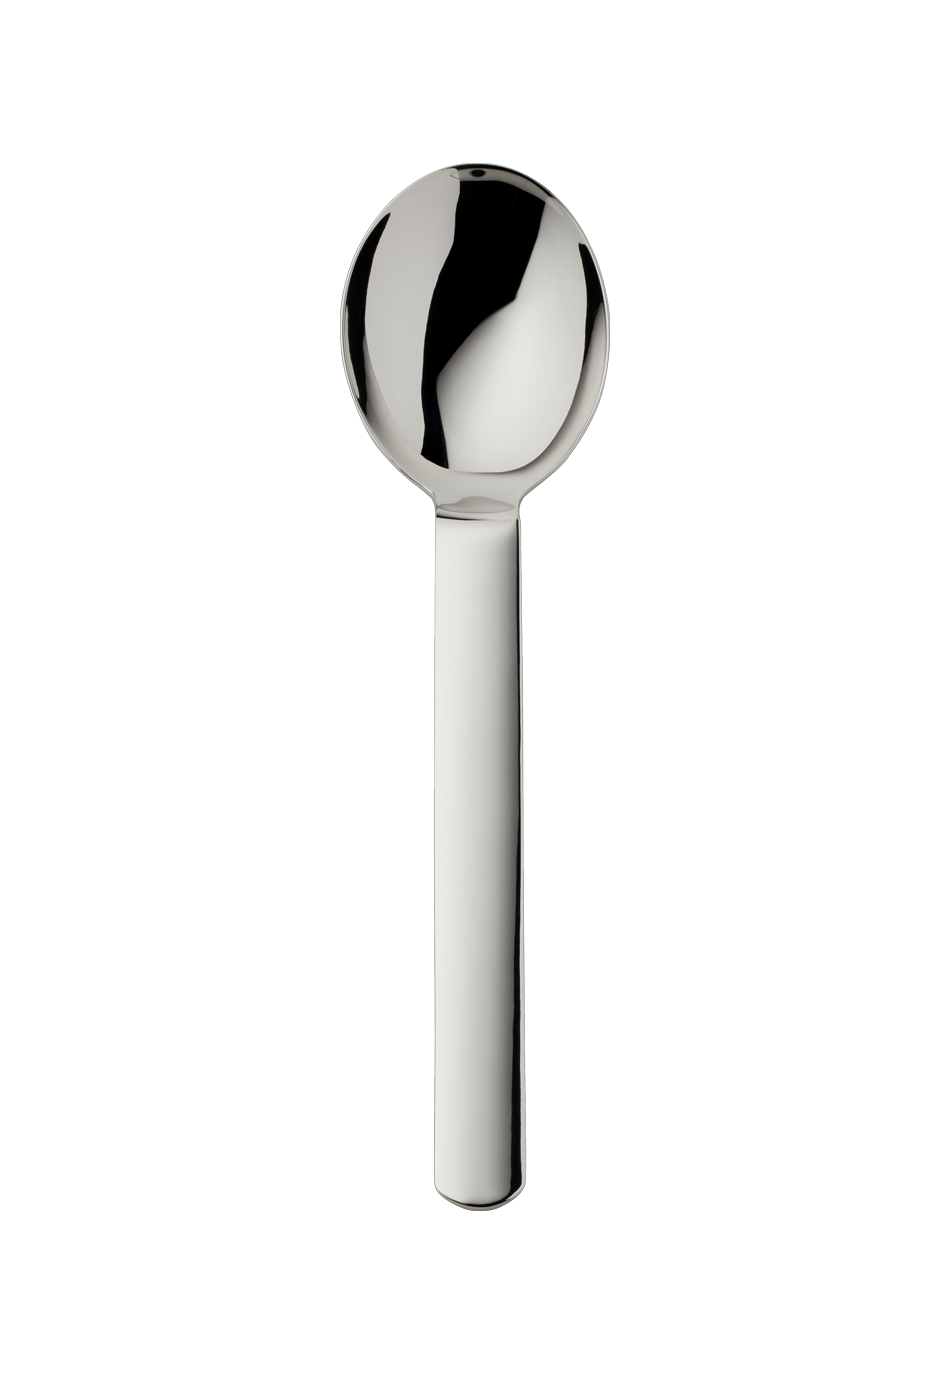 Topos Compote/Salad Serving Spoon, large (18/8 stainless steel)